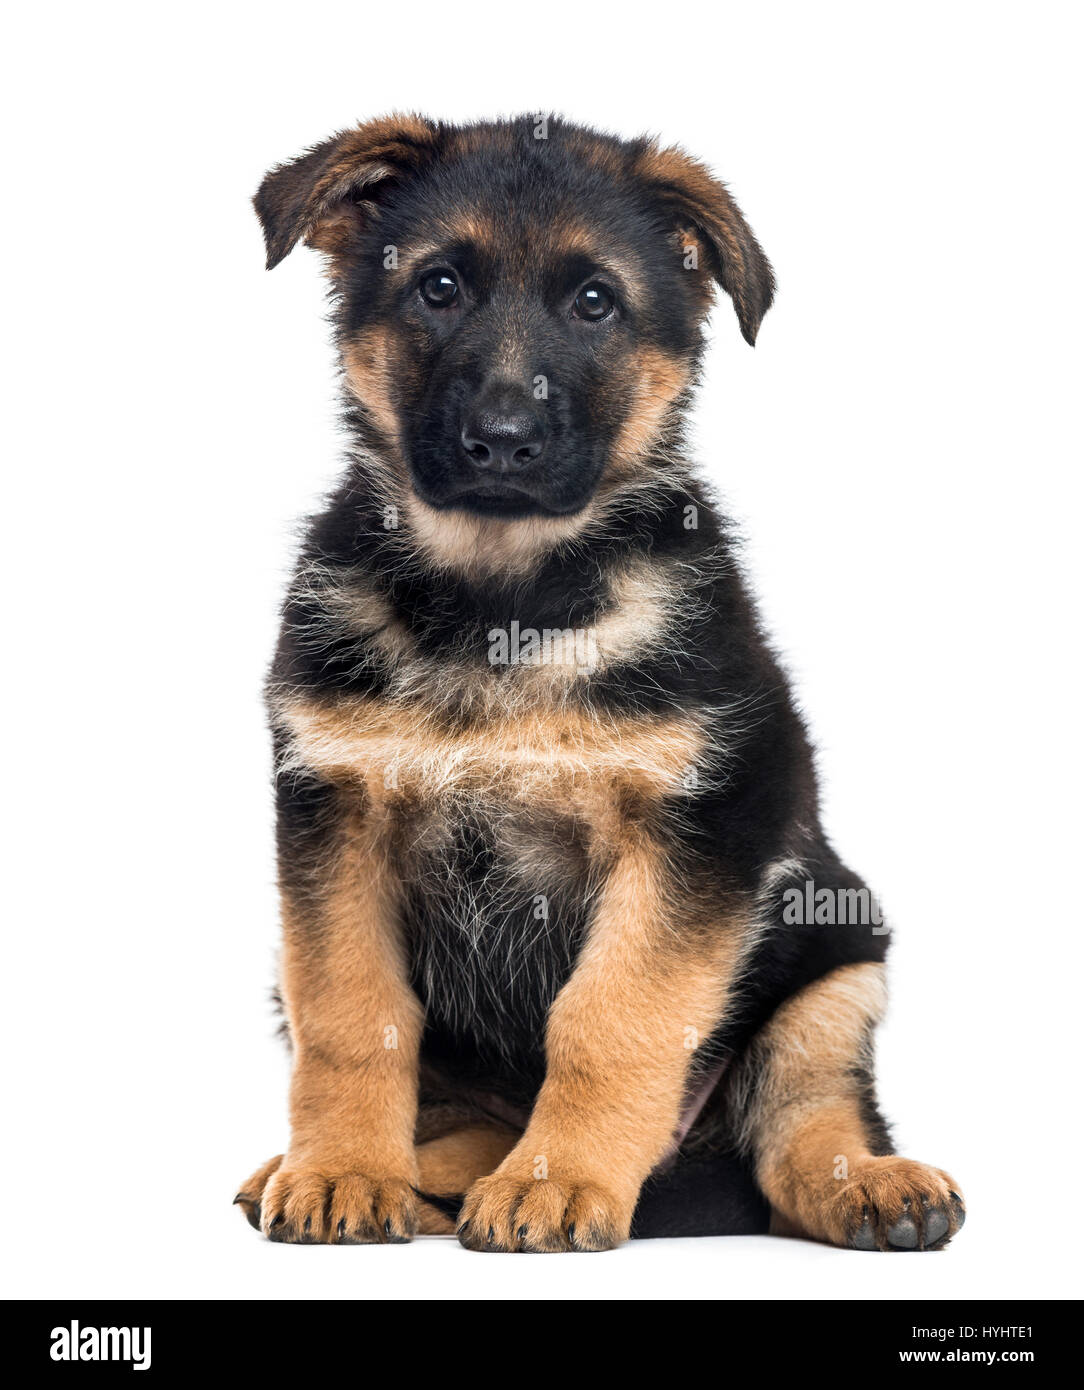 2 Months Old German Shepherd Puppy High Resolution Stock Photography and  Images - Alamy